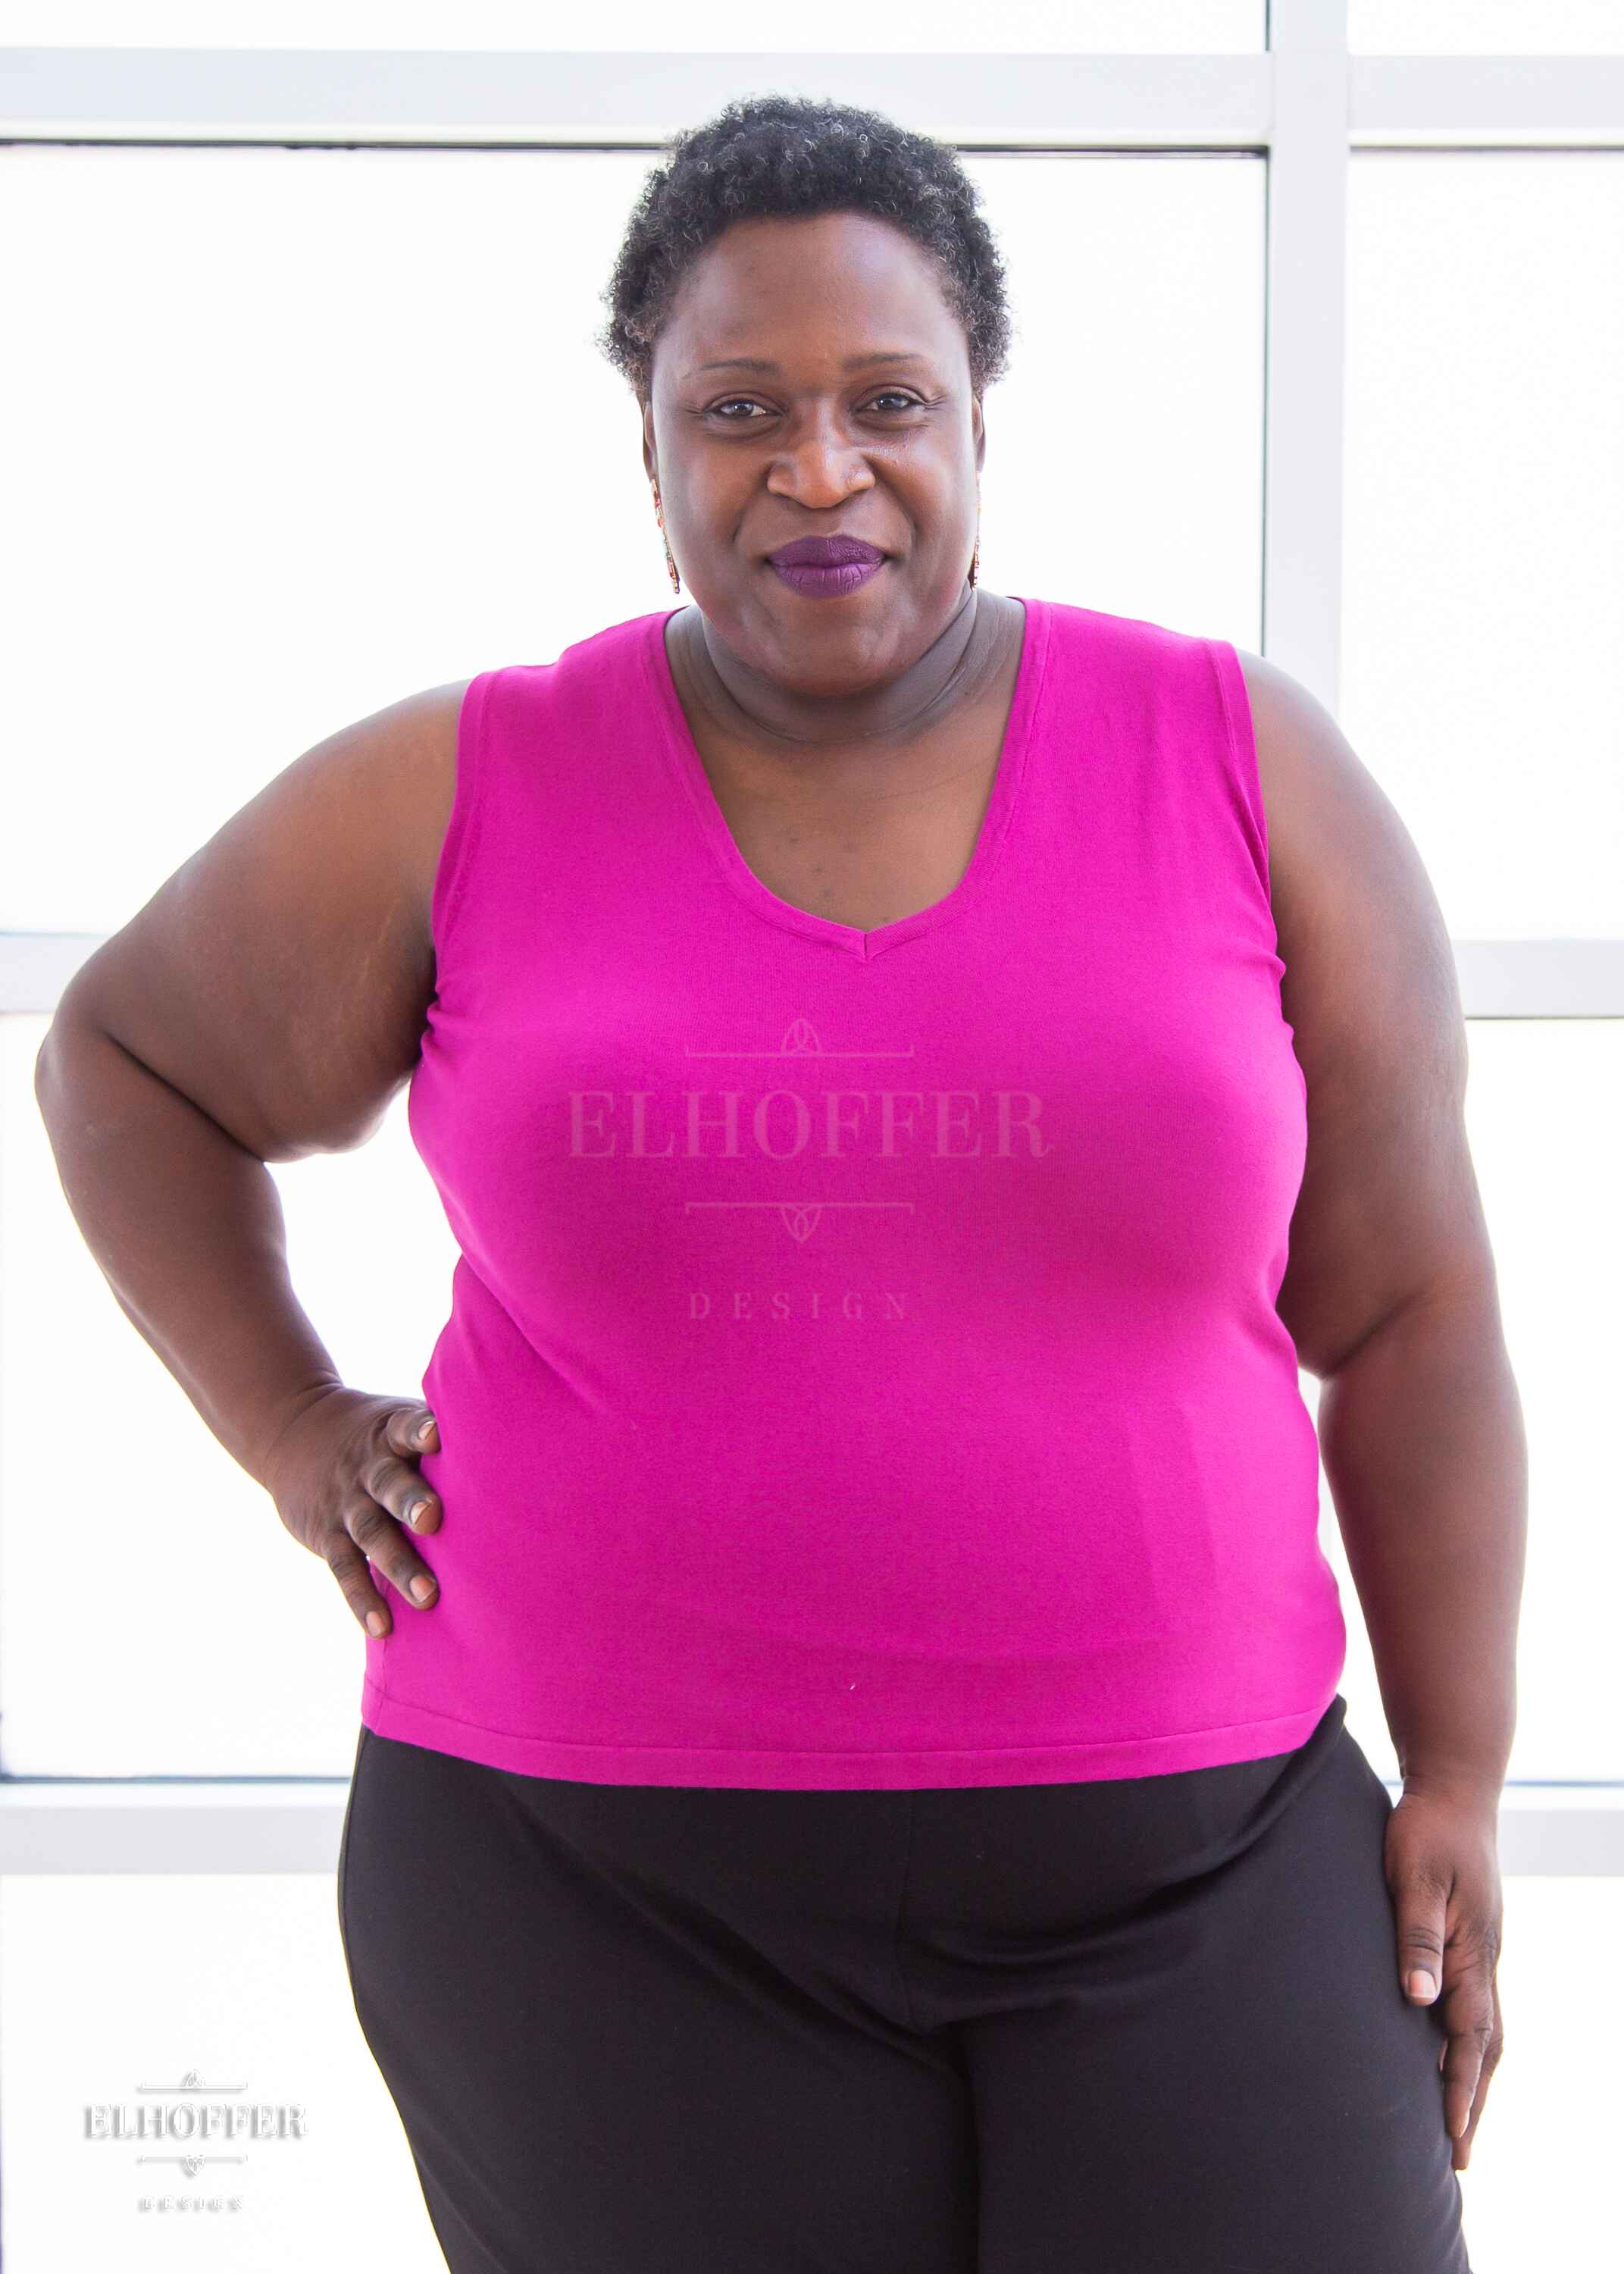 Adalgiza, a medium brown skinned 4xl model with short dark super curly hair, is smiling while wearing a bright pink lightweight knit v neck tank top. The tank top hits about mid hip in length.